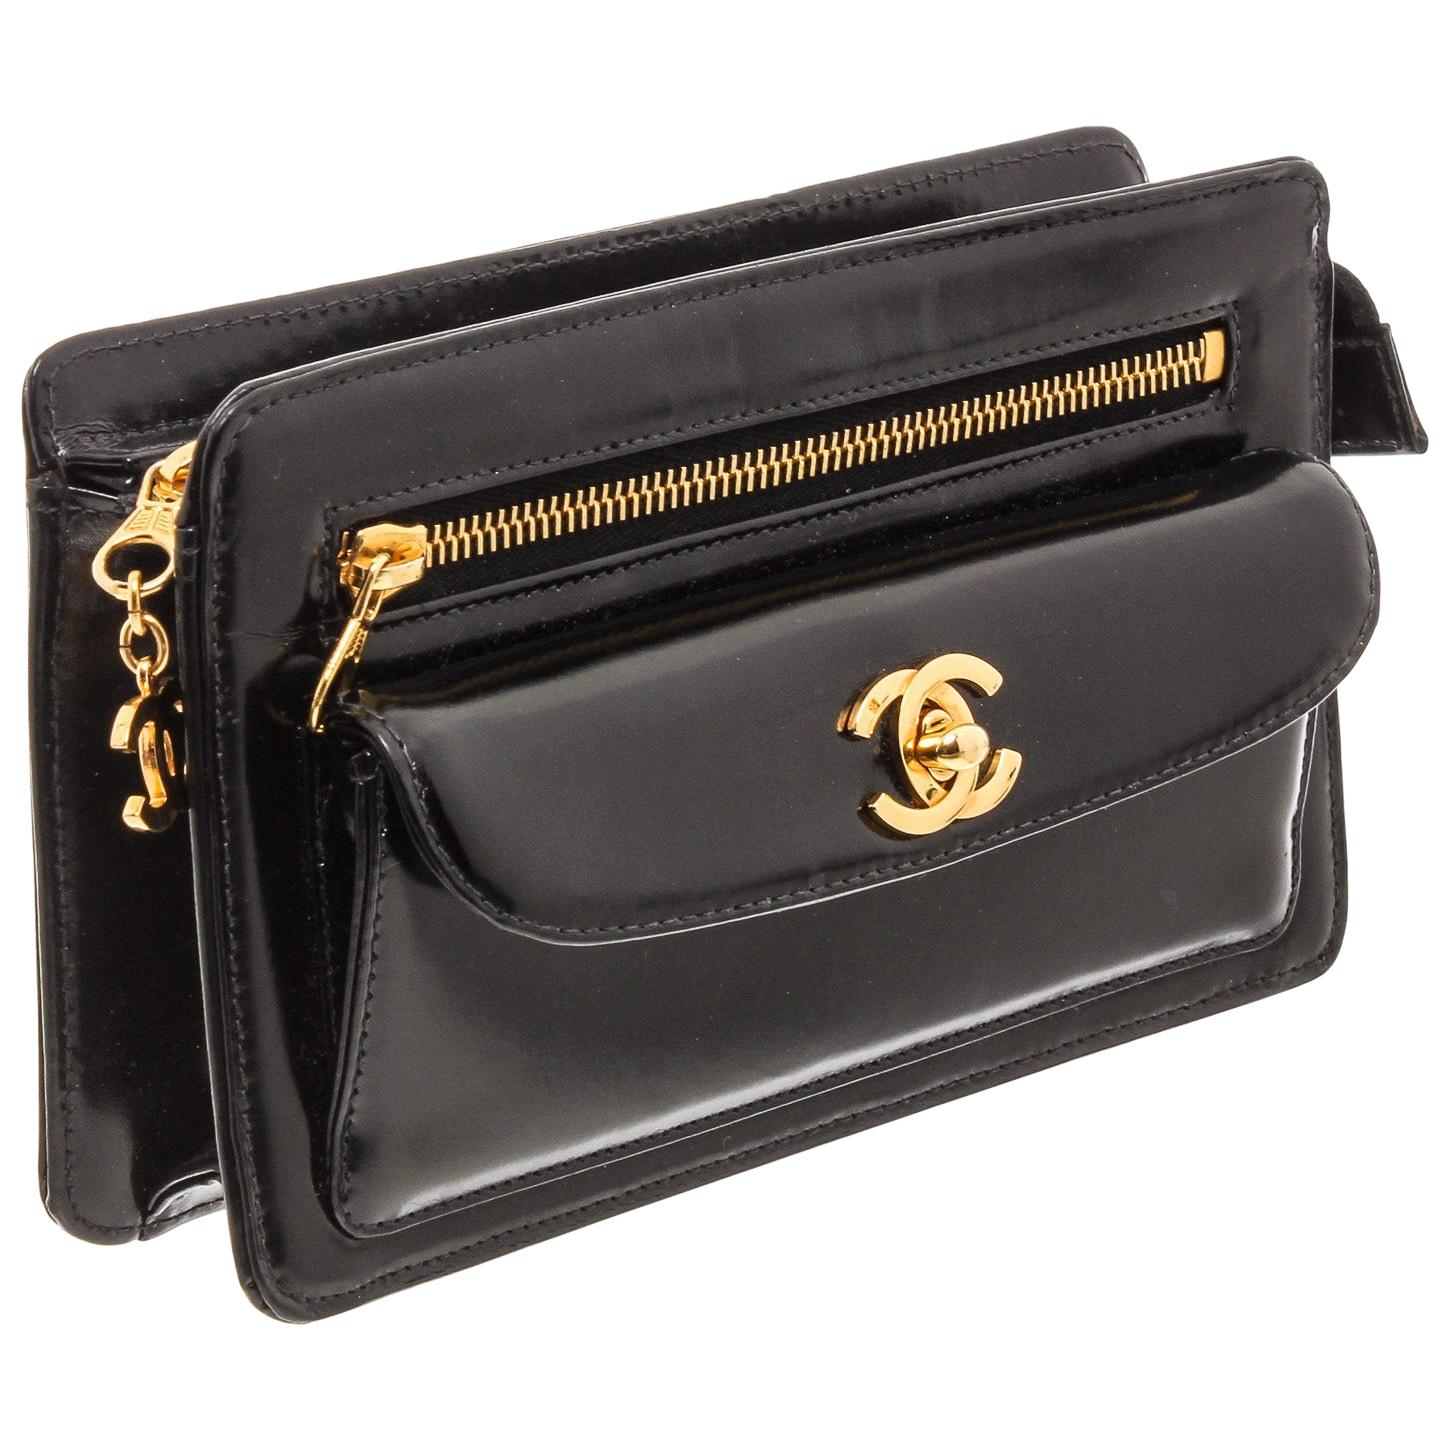 Pre Loved Chanel Typewriter Clutch Bag in Black Patent Leather – Bluefly